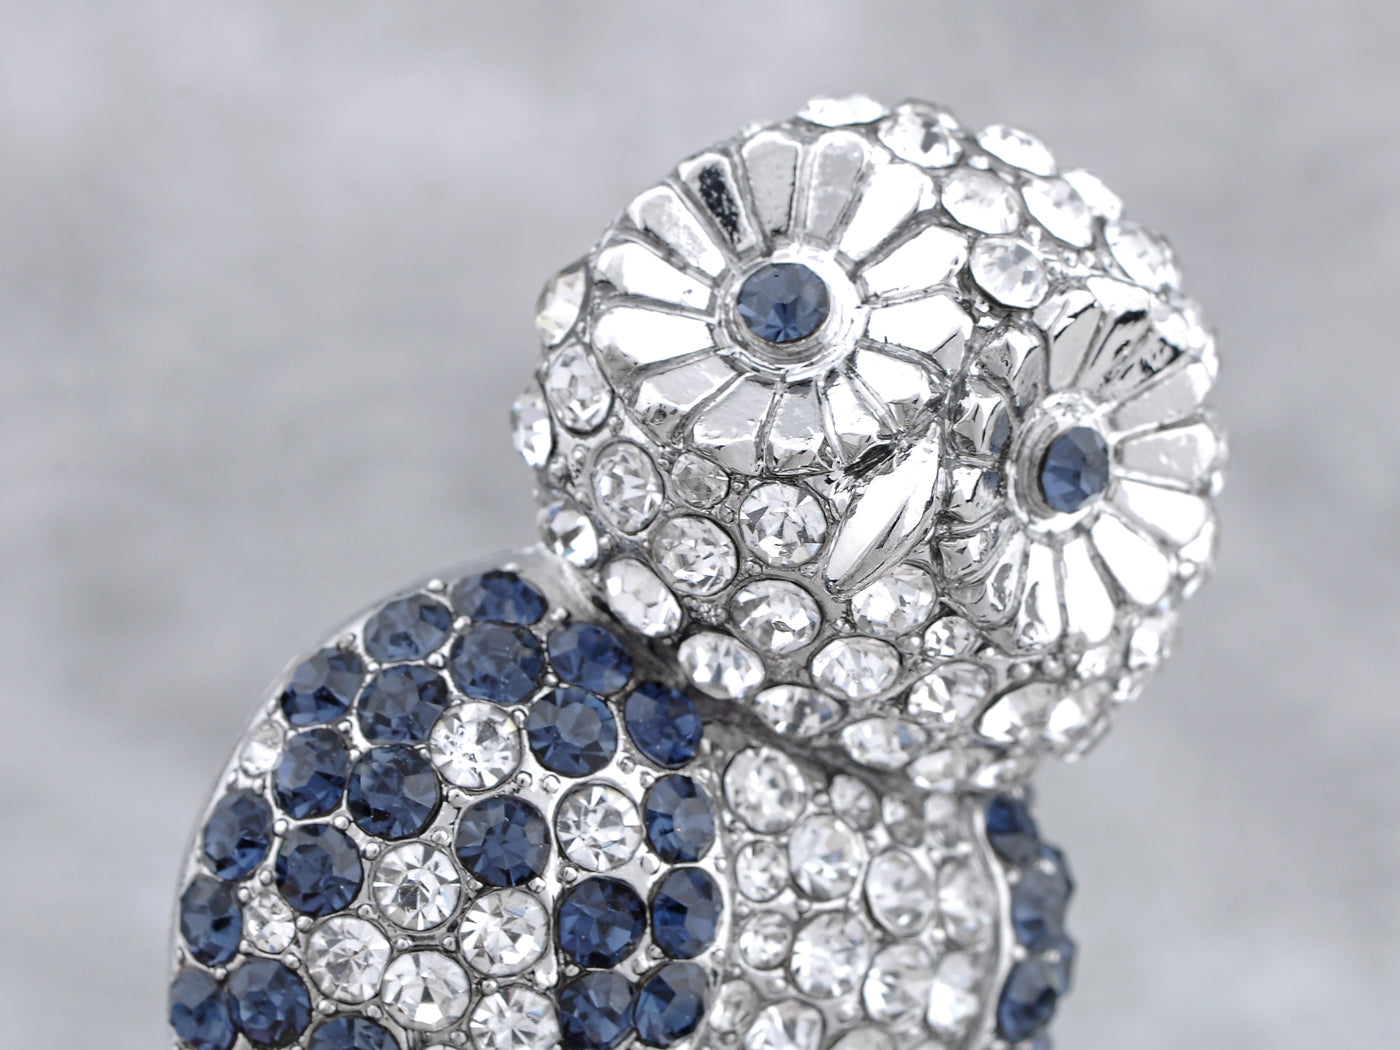 Sapphire Blue Hooting Happy Owl Perched Brooch Pin